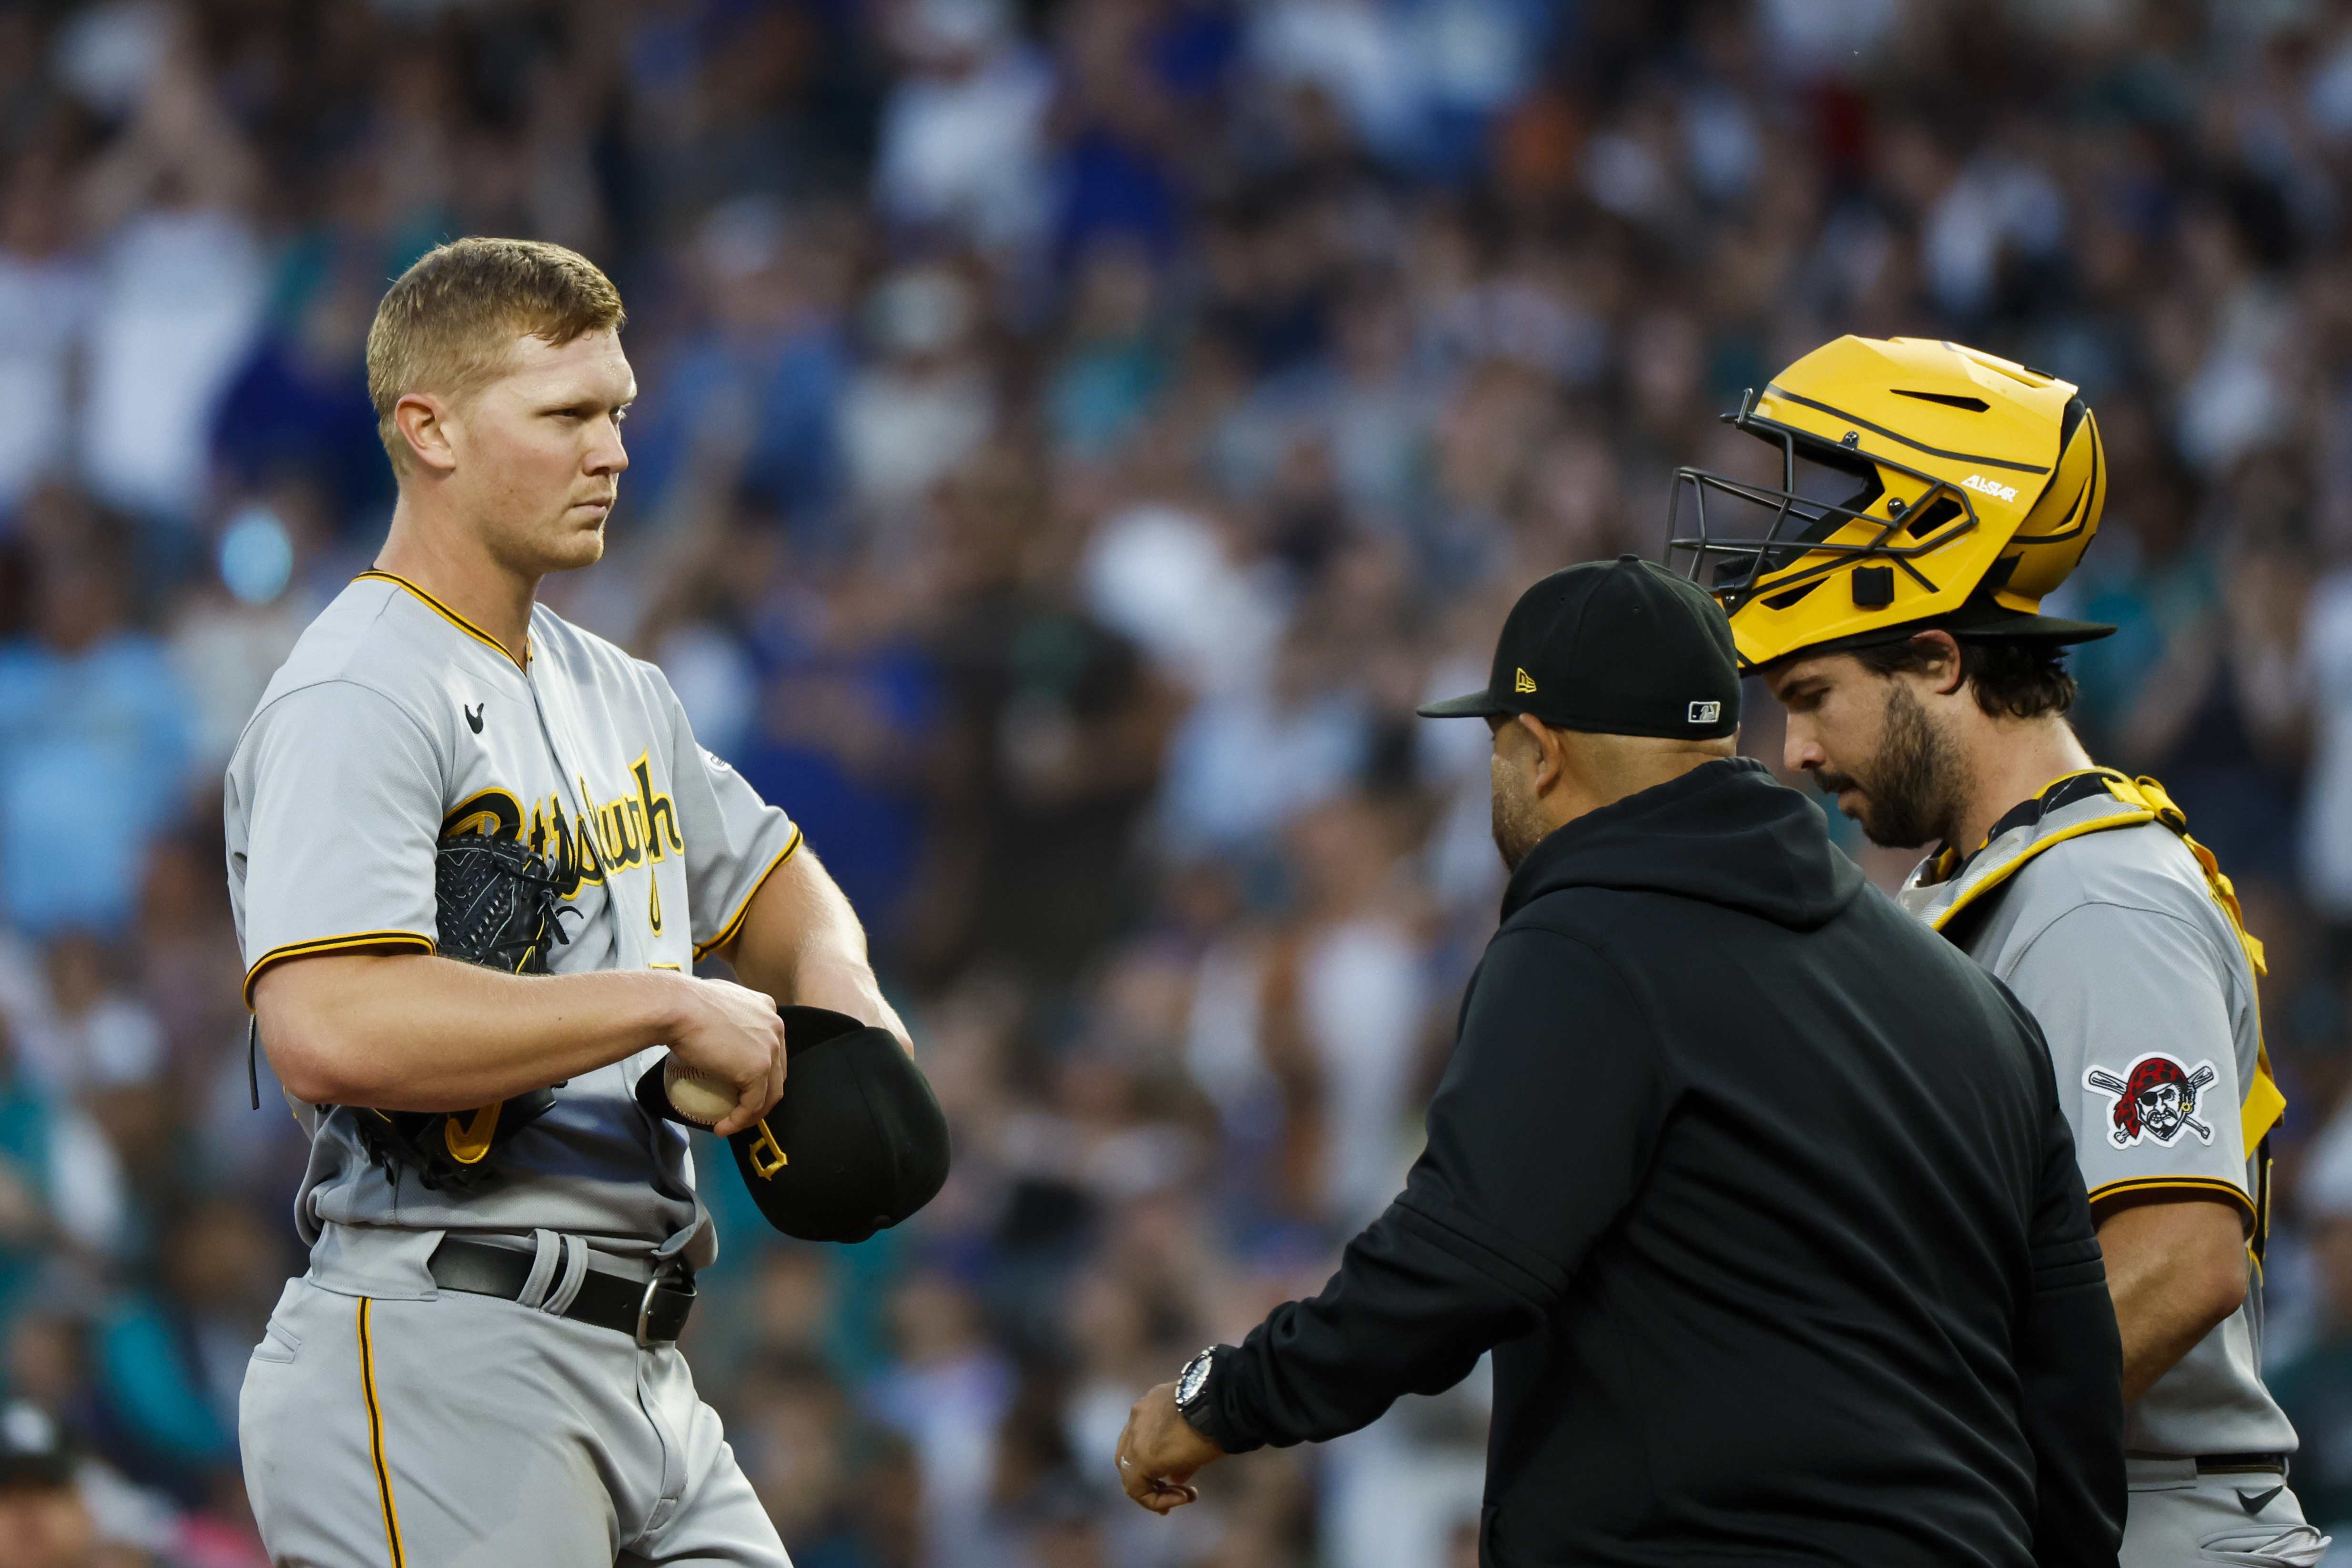 Suárez's 3-run homer lifts Mariners over Pirates 6-3 in 10 innings - The  San Diego Union-Tribune